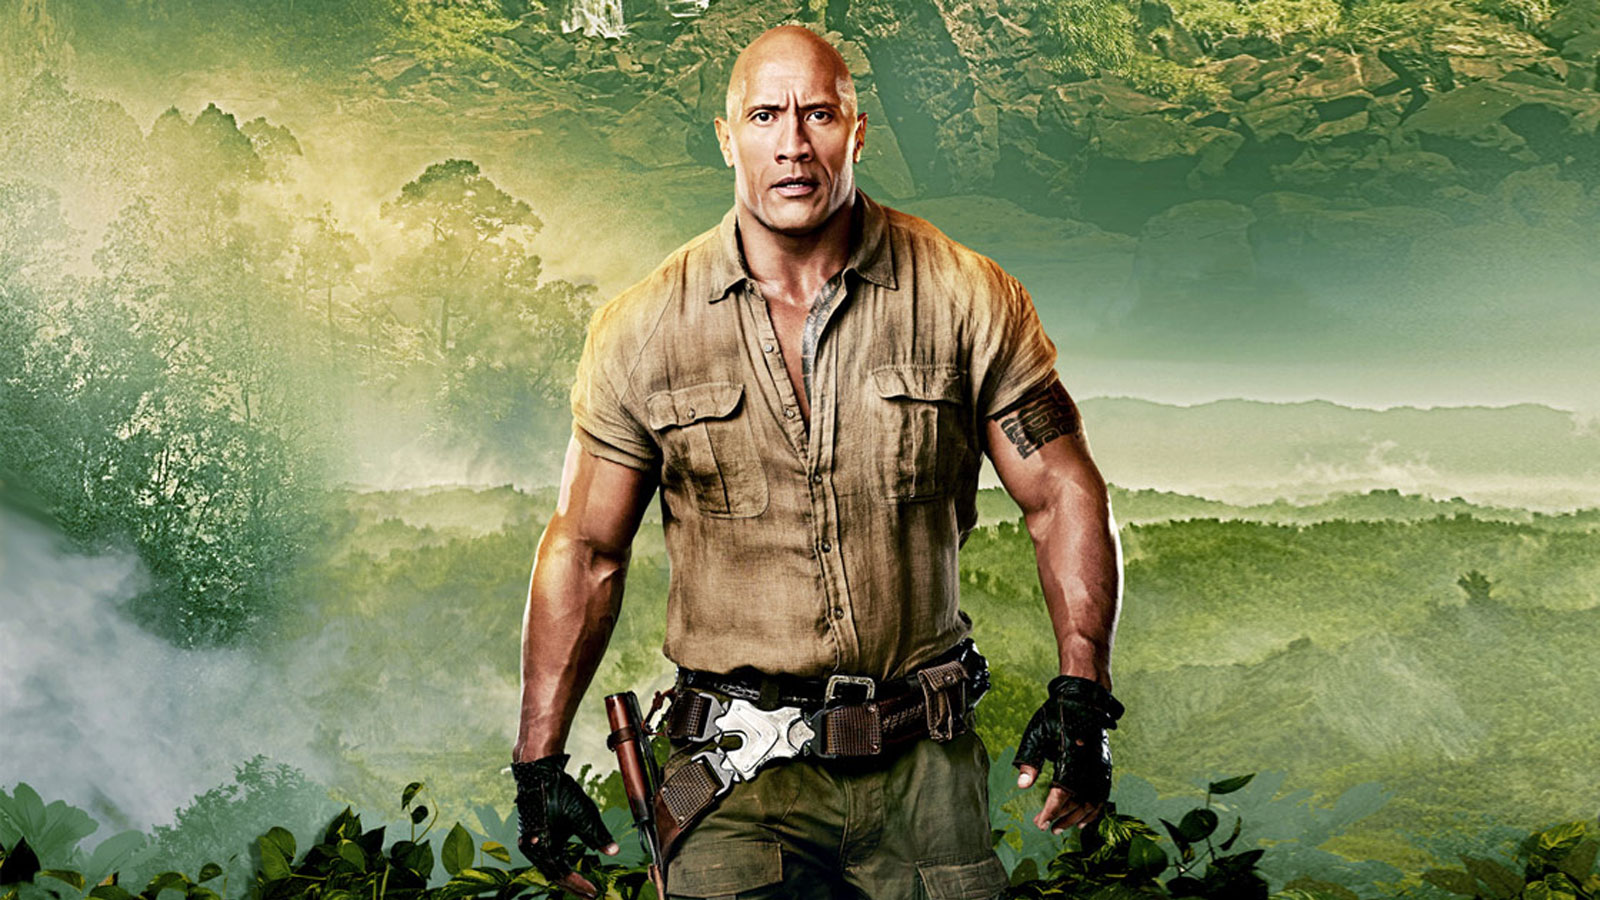 Jumanji: Next Level and What We Know So Far Features Film Threat